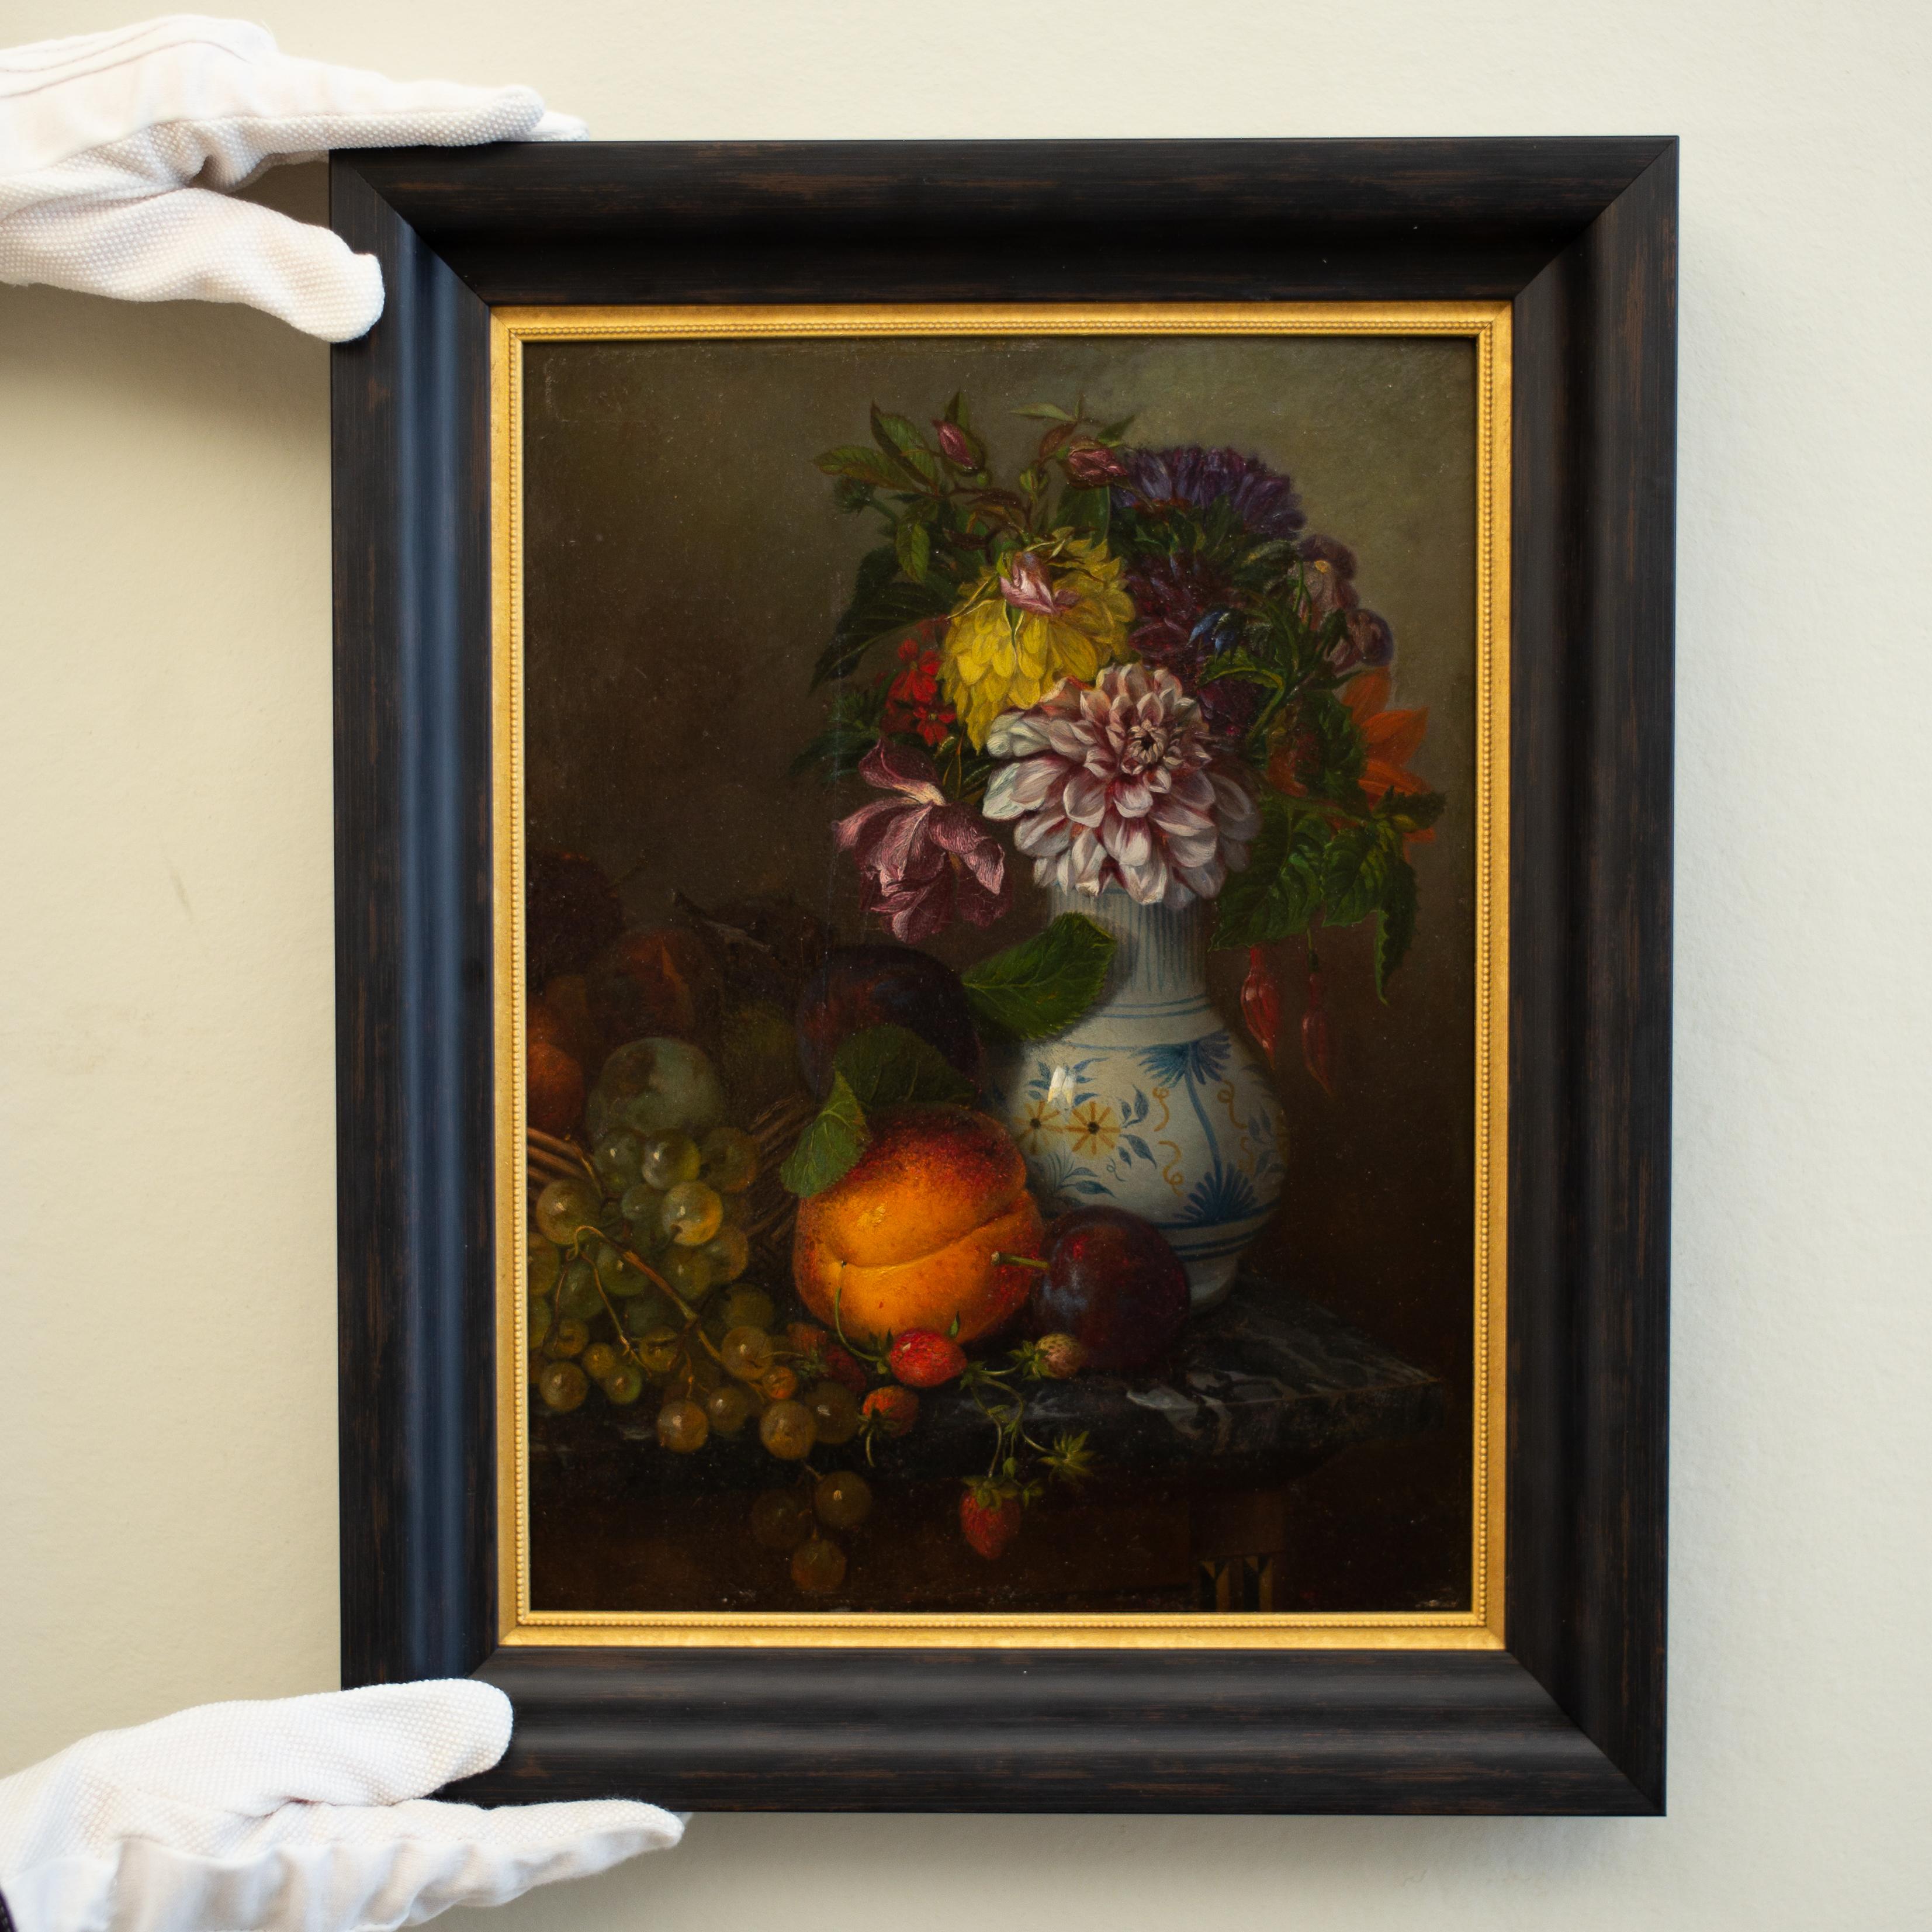 Nature Morte With Fruits and Flowers, French School, c. 1860, Oil on Panel - Painting by Unknown